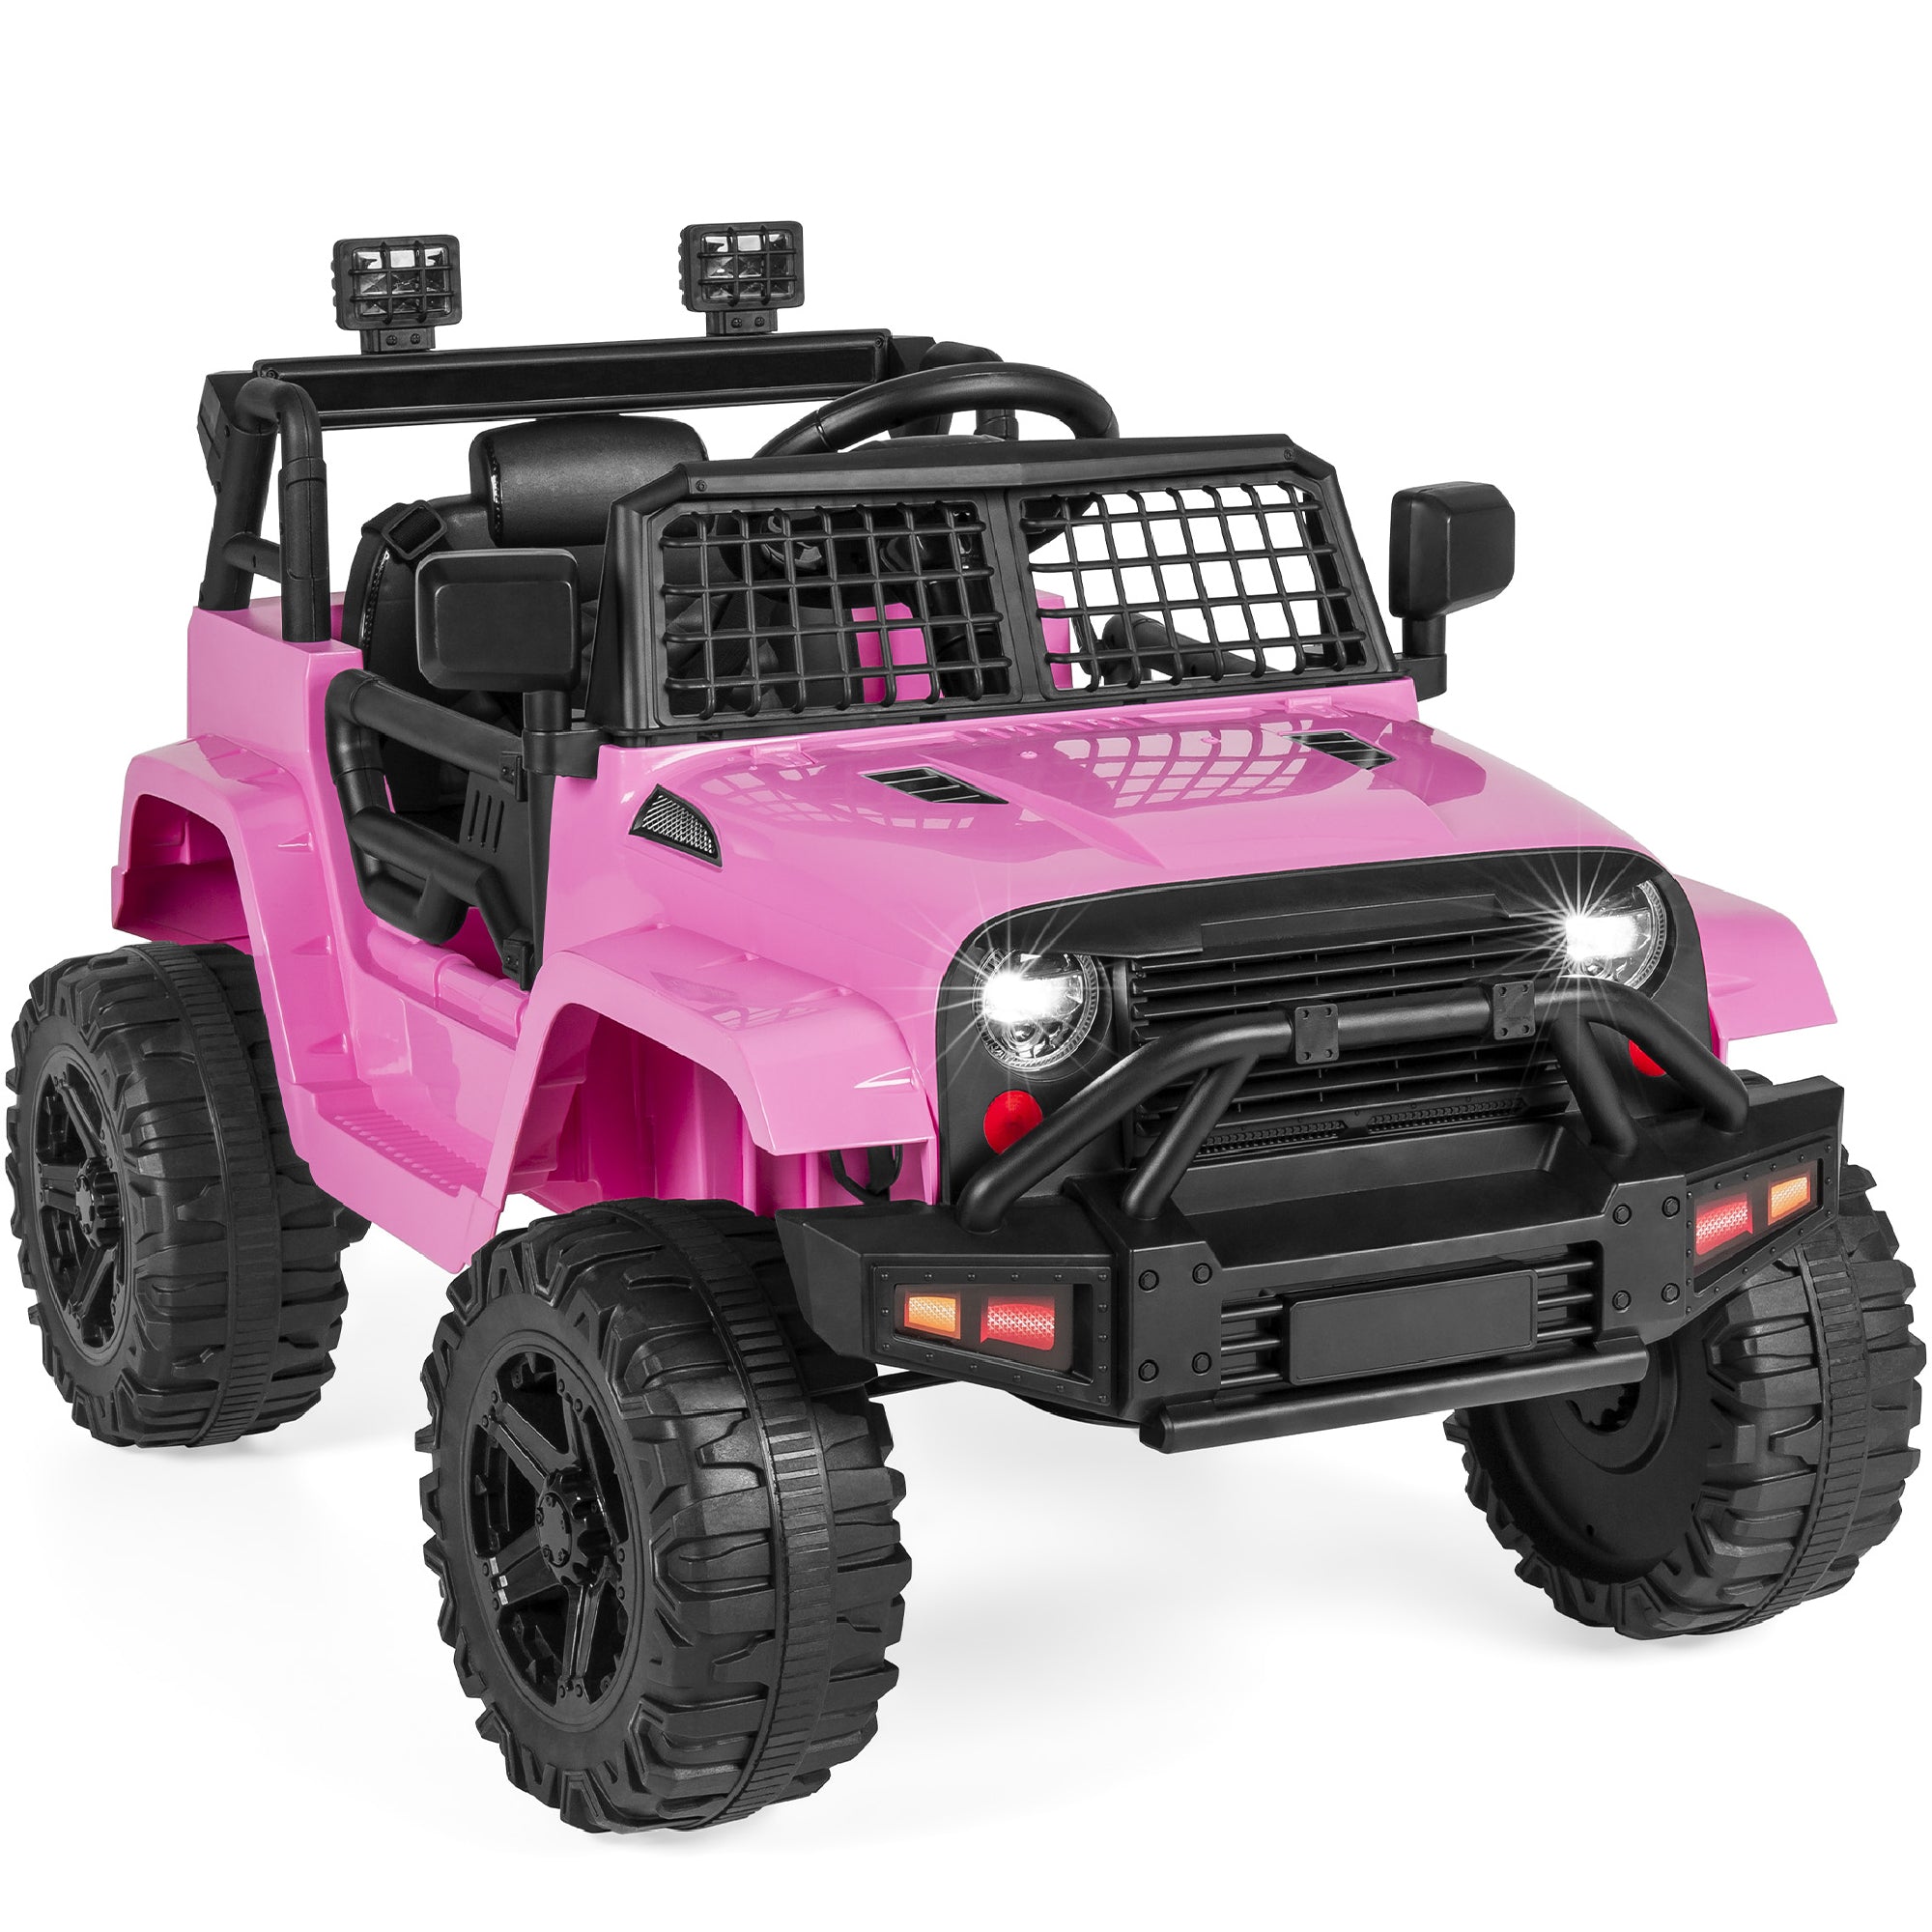 Best Choice Products 12V Kids Ride On Truck Car w/ Parent Remote Control, Spring Suspension, LED Lights - Hot Pink